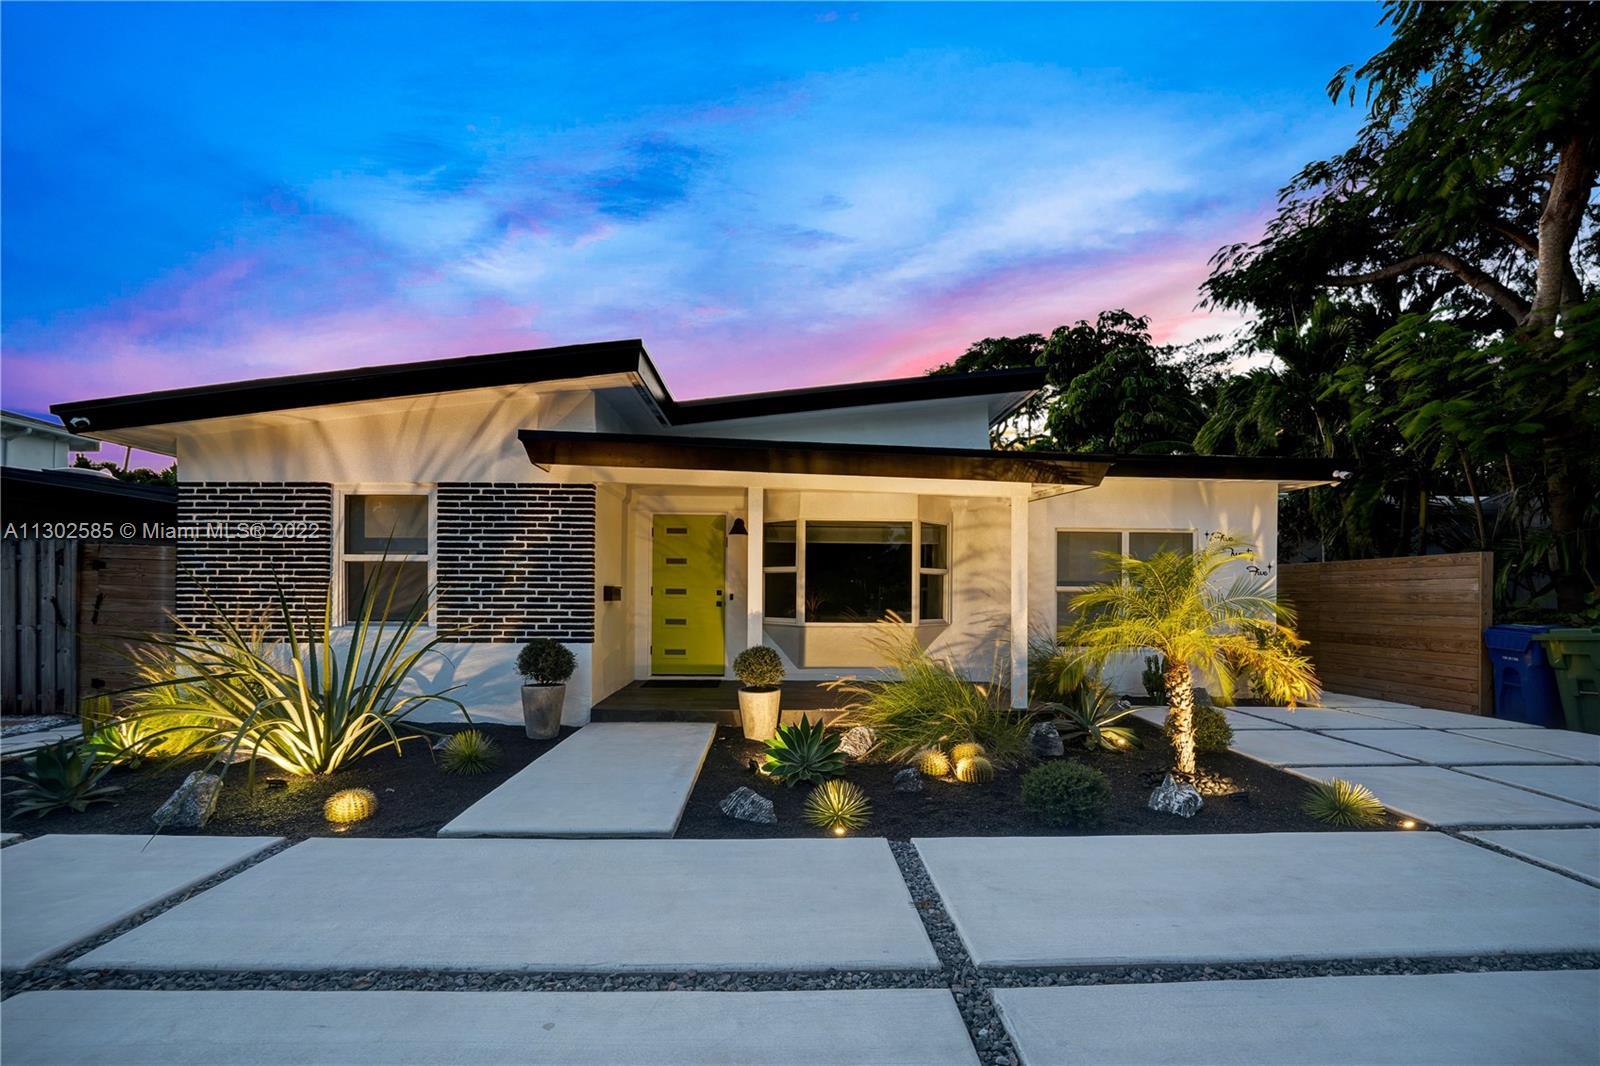 Brilliant move-in ready Palm Springs style charmer! Just in time for the holidays, this 3-bedroom 2-